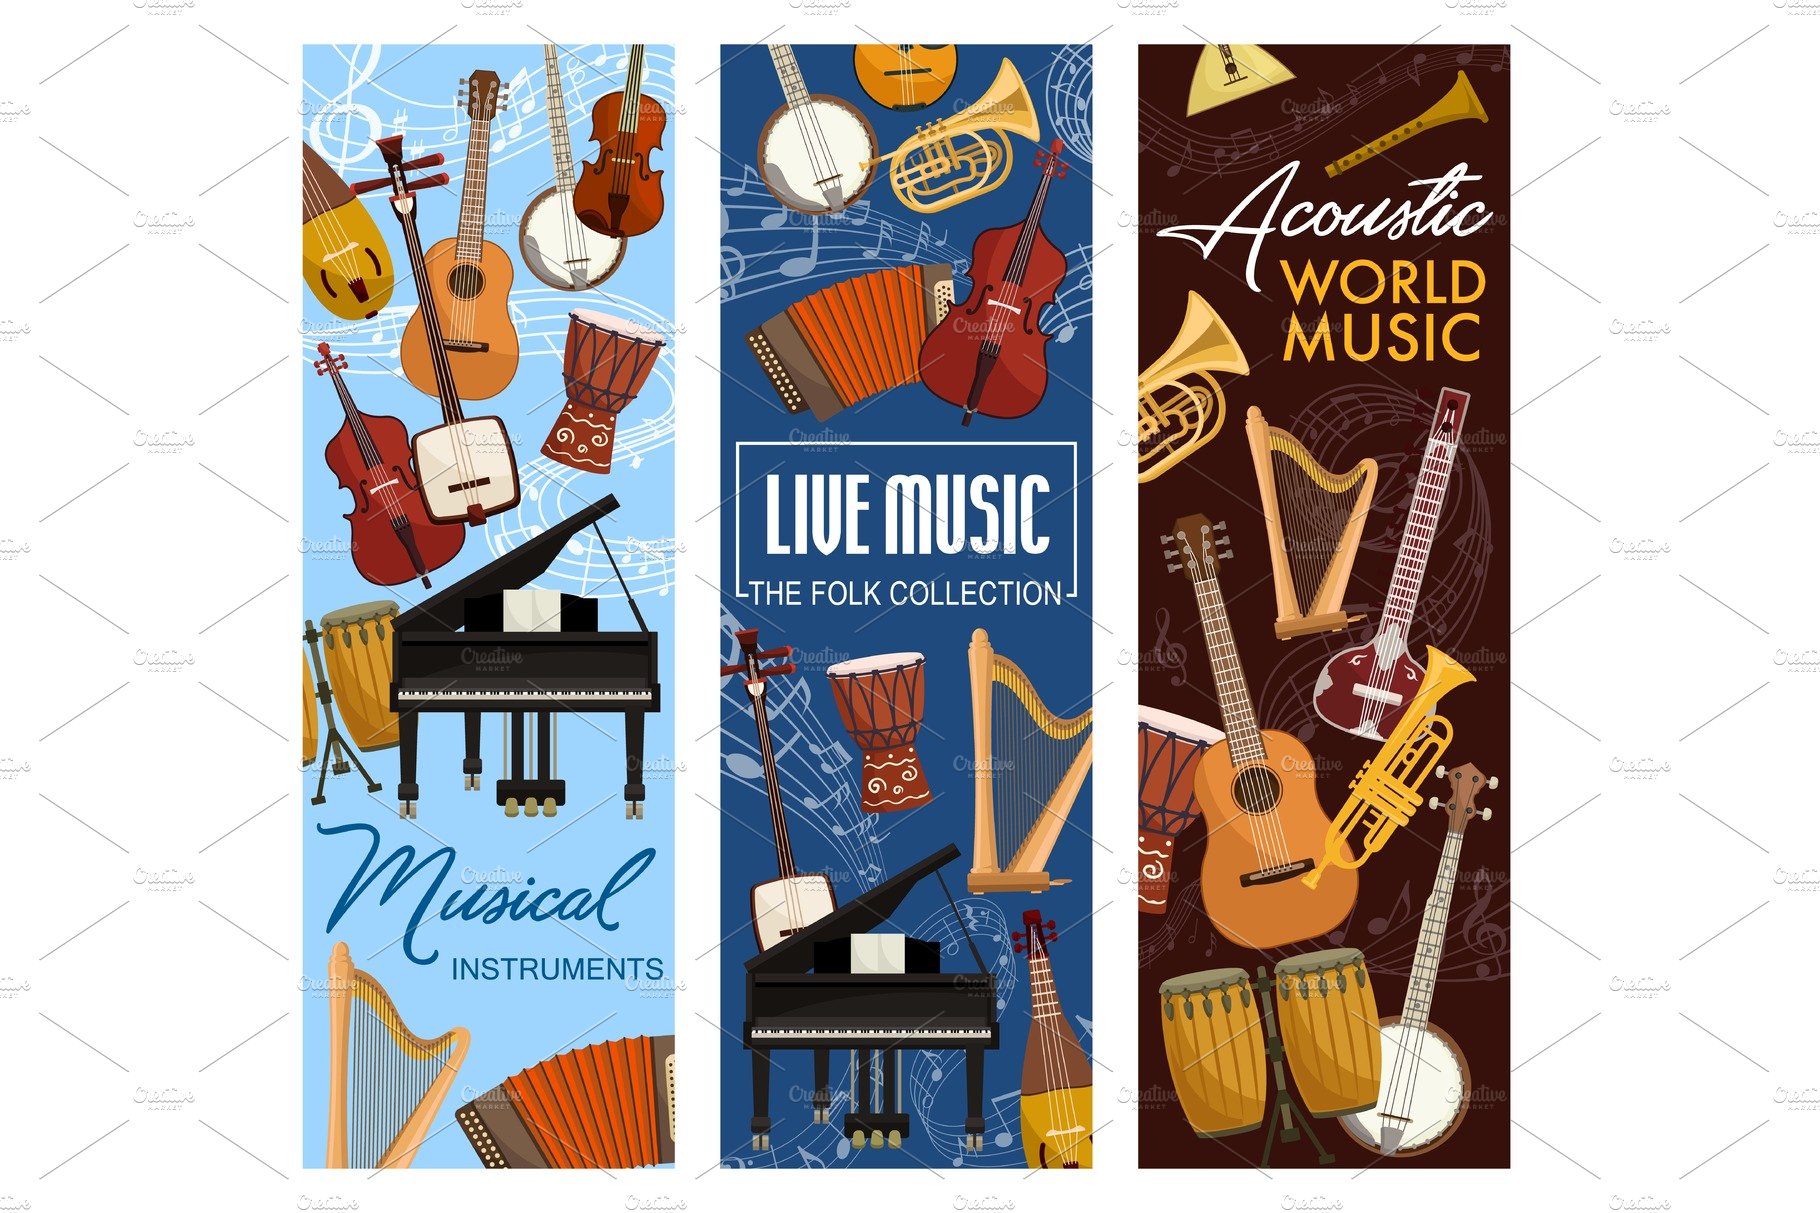 Live and folk music instruments cover image.